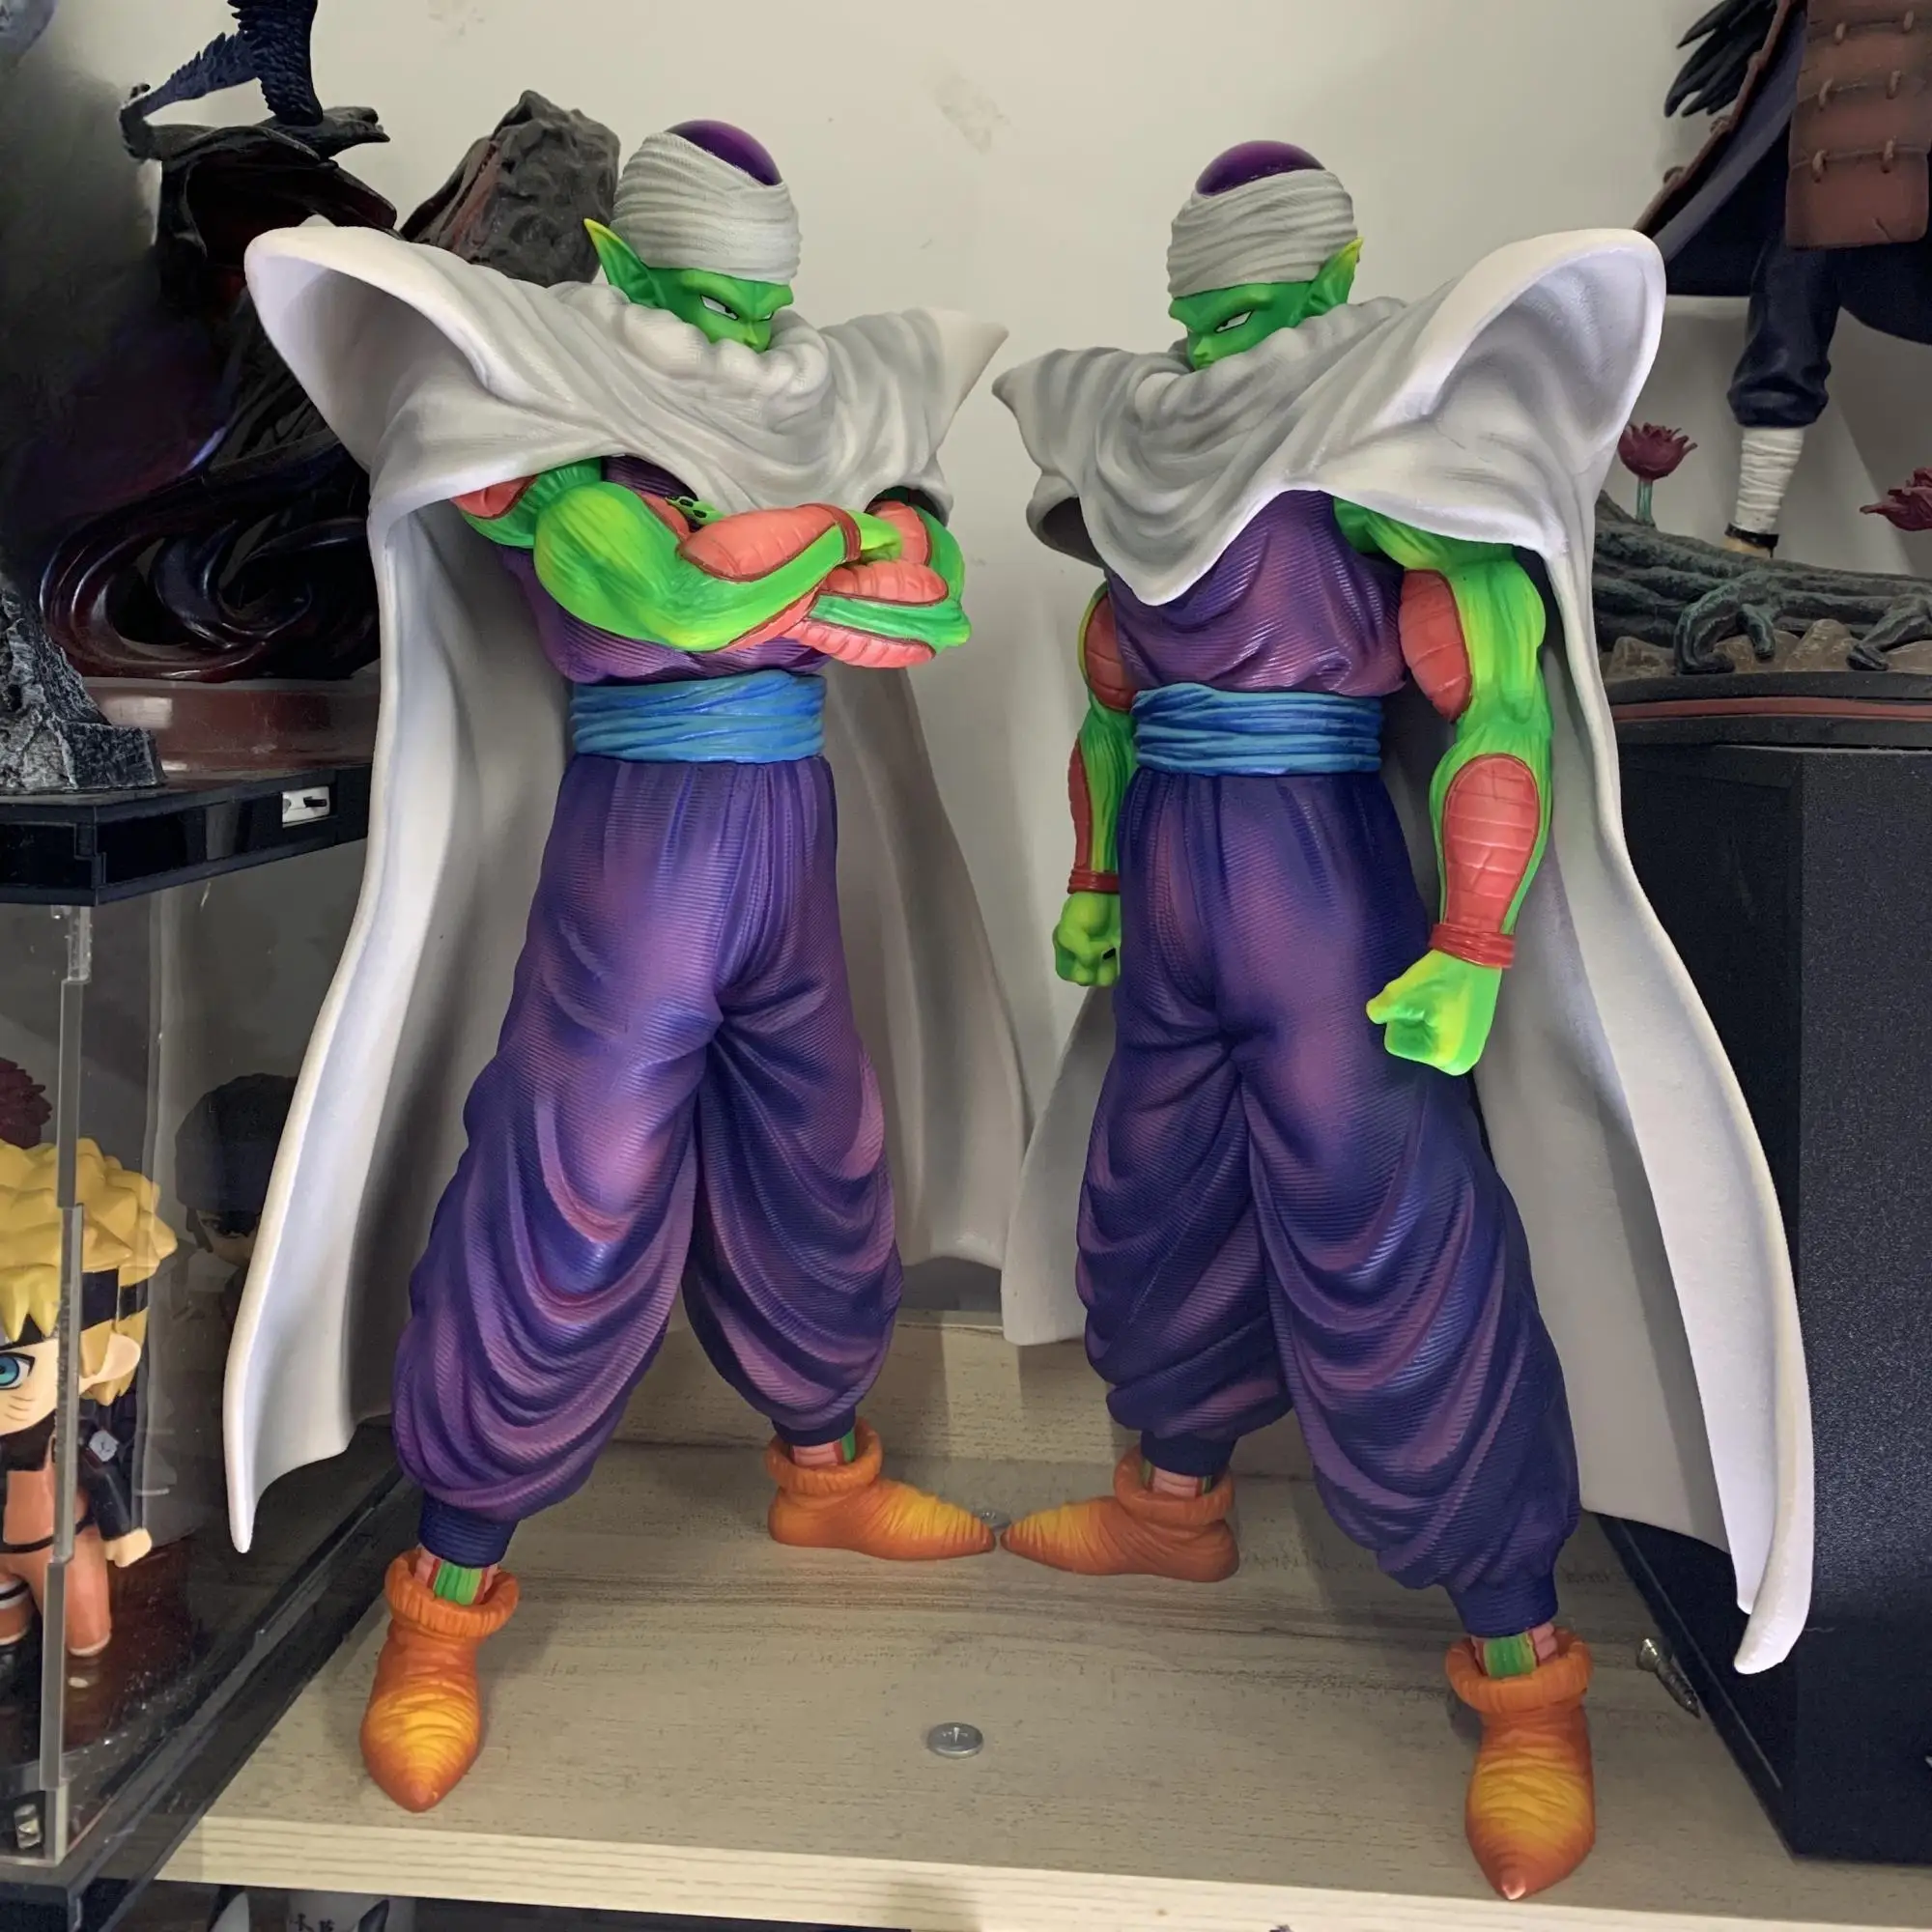 

New 32cm Anime Dragon Ball Z Piccolo Figure Replaceable Arm Piccolo Figurine Pvc Action Figures Gk Statue Collection Model Toy